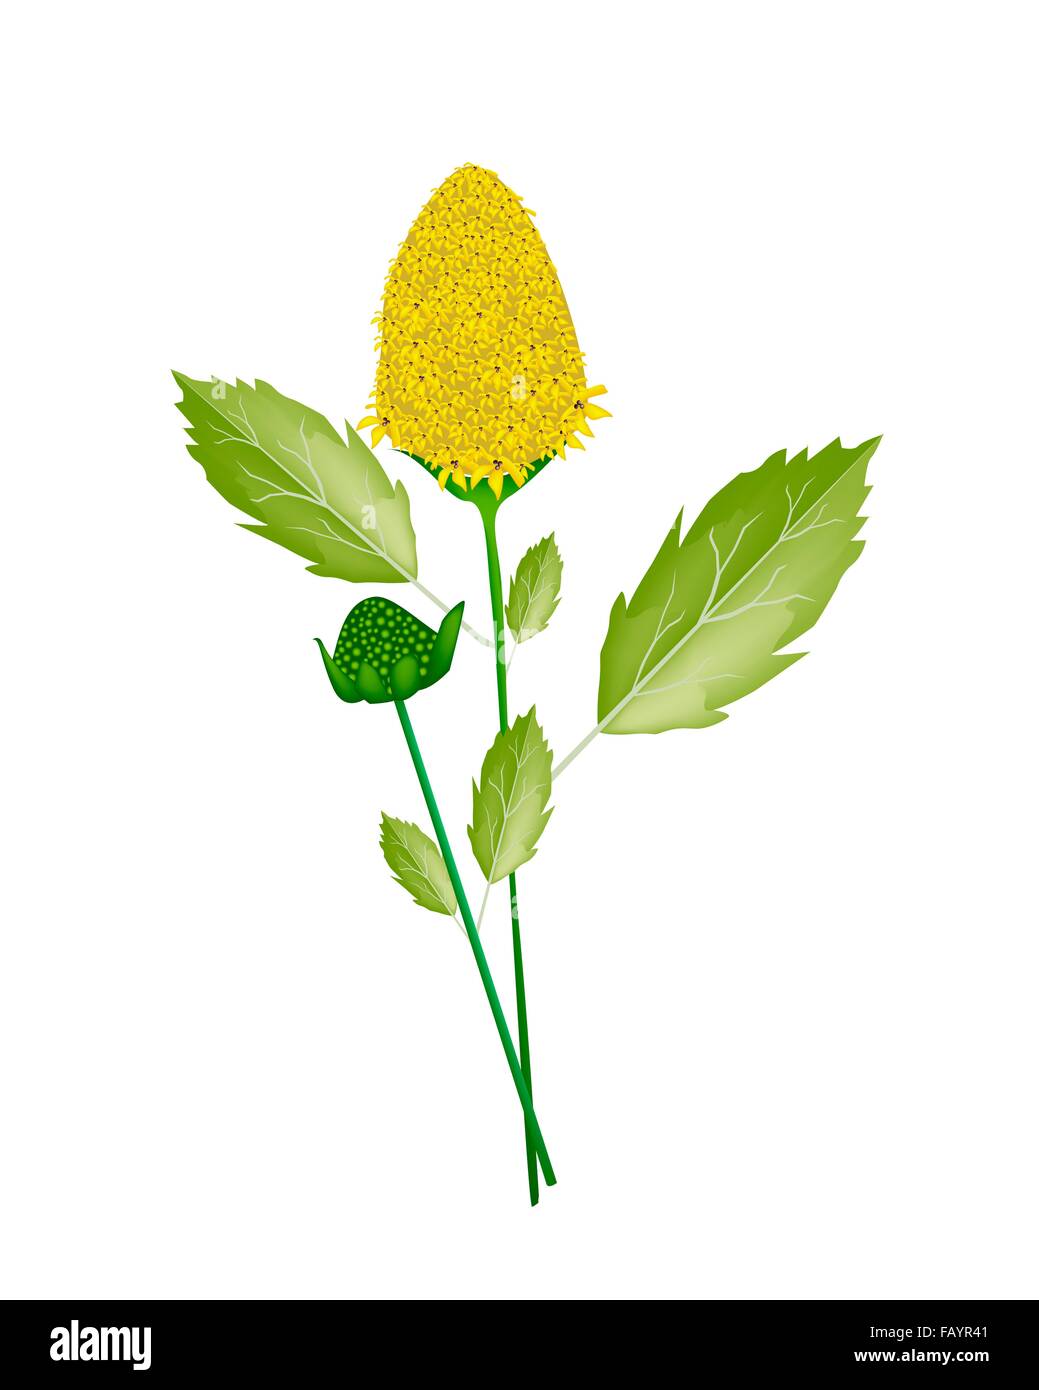 Vegetable and Herb, An Illustration of Fresh Paracress Plant with Beautiful Yellow Blossom Used for Seasoning in Cooking. Stock Photo